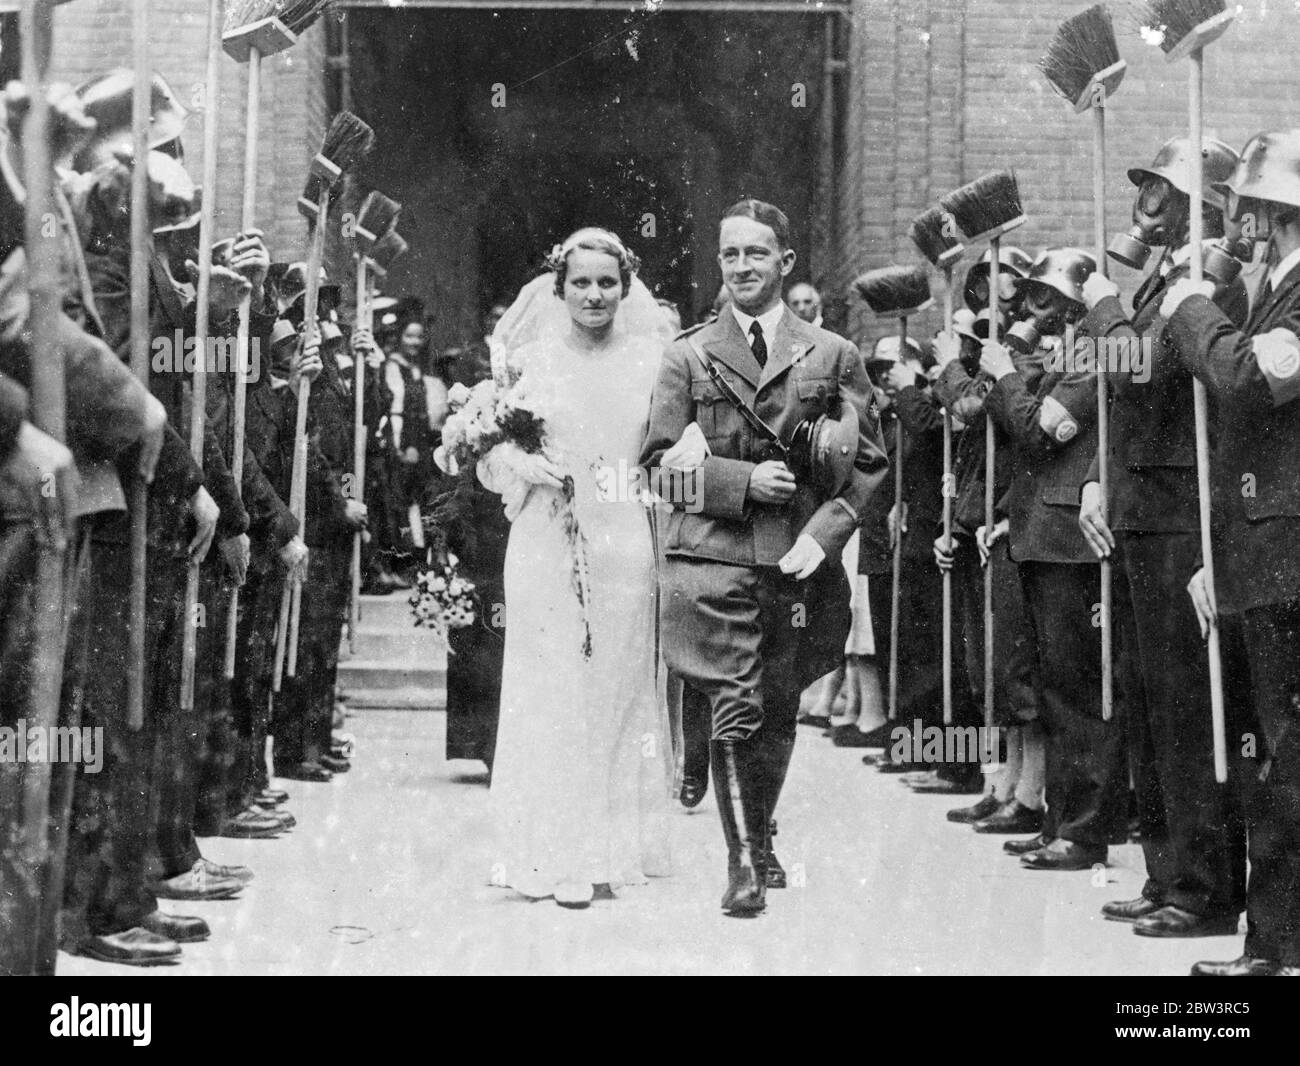 First  Air Defence  Wedding In Vienna , Gas - Masked Guard Of Honour The guard of honour wearing gas - masks and steel - halmets and holding lime brooms attended the first  air - defence  wedding in Vienna . Air Defence Leader Hugo Noll was married to Fraulein Helga Schenk . The strange guard of honour  presented brooms  as the bridal couple left church . Photo shows : The bride and groom walking through the guard of honour of gas - masked anti air - raid men . 4 Jun 1936 Stock Photo